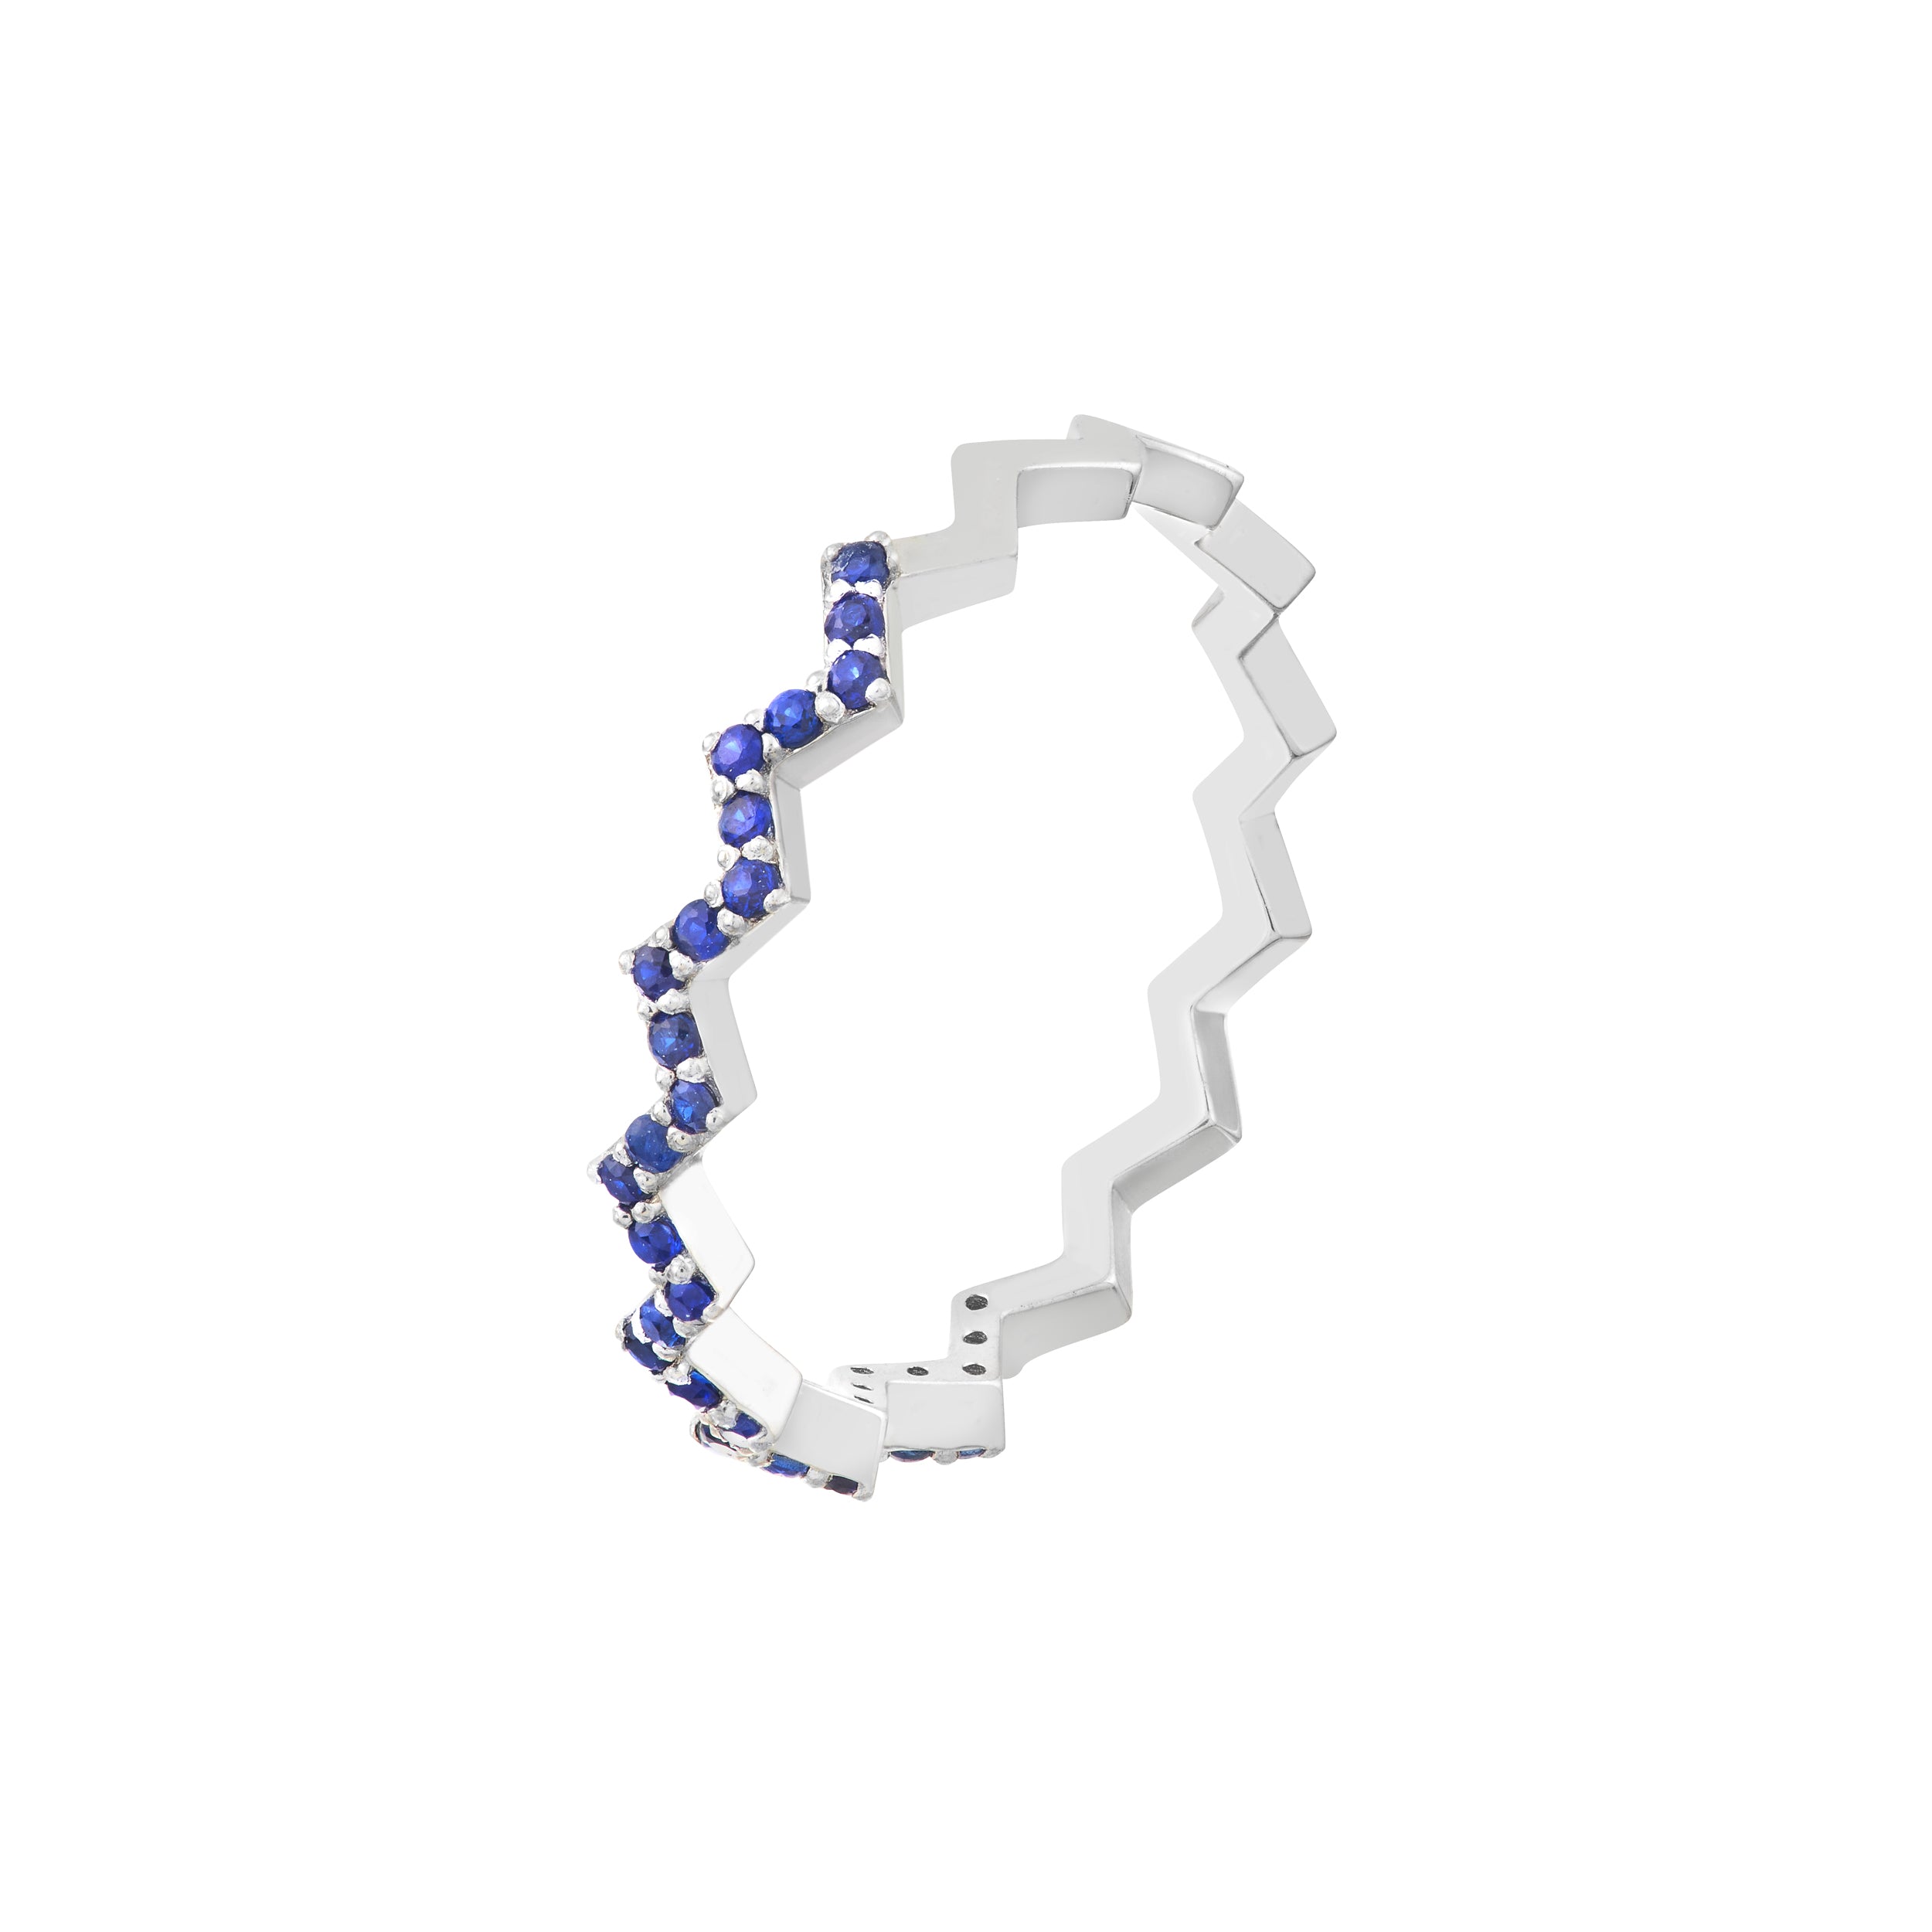 Stackable Sapphires Ring - Colored Stone Rings - Womens